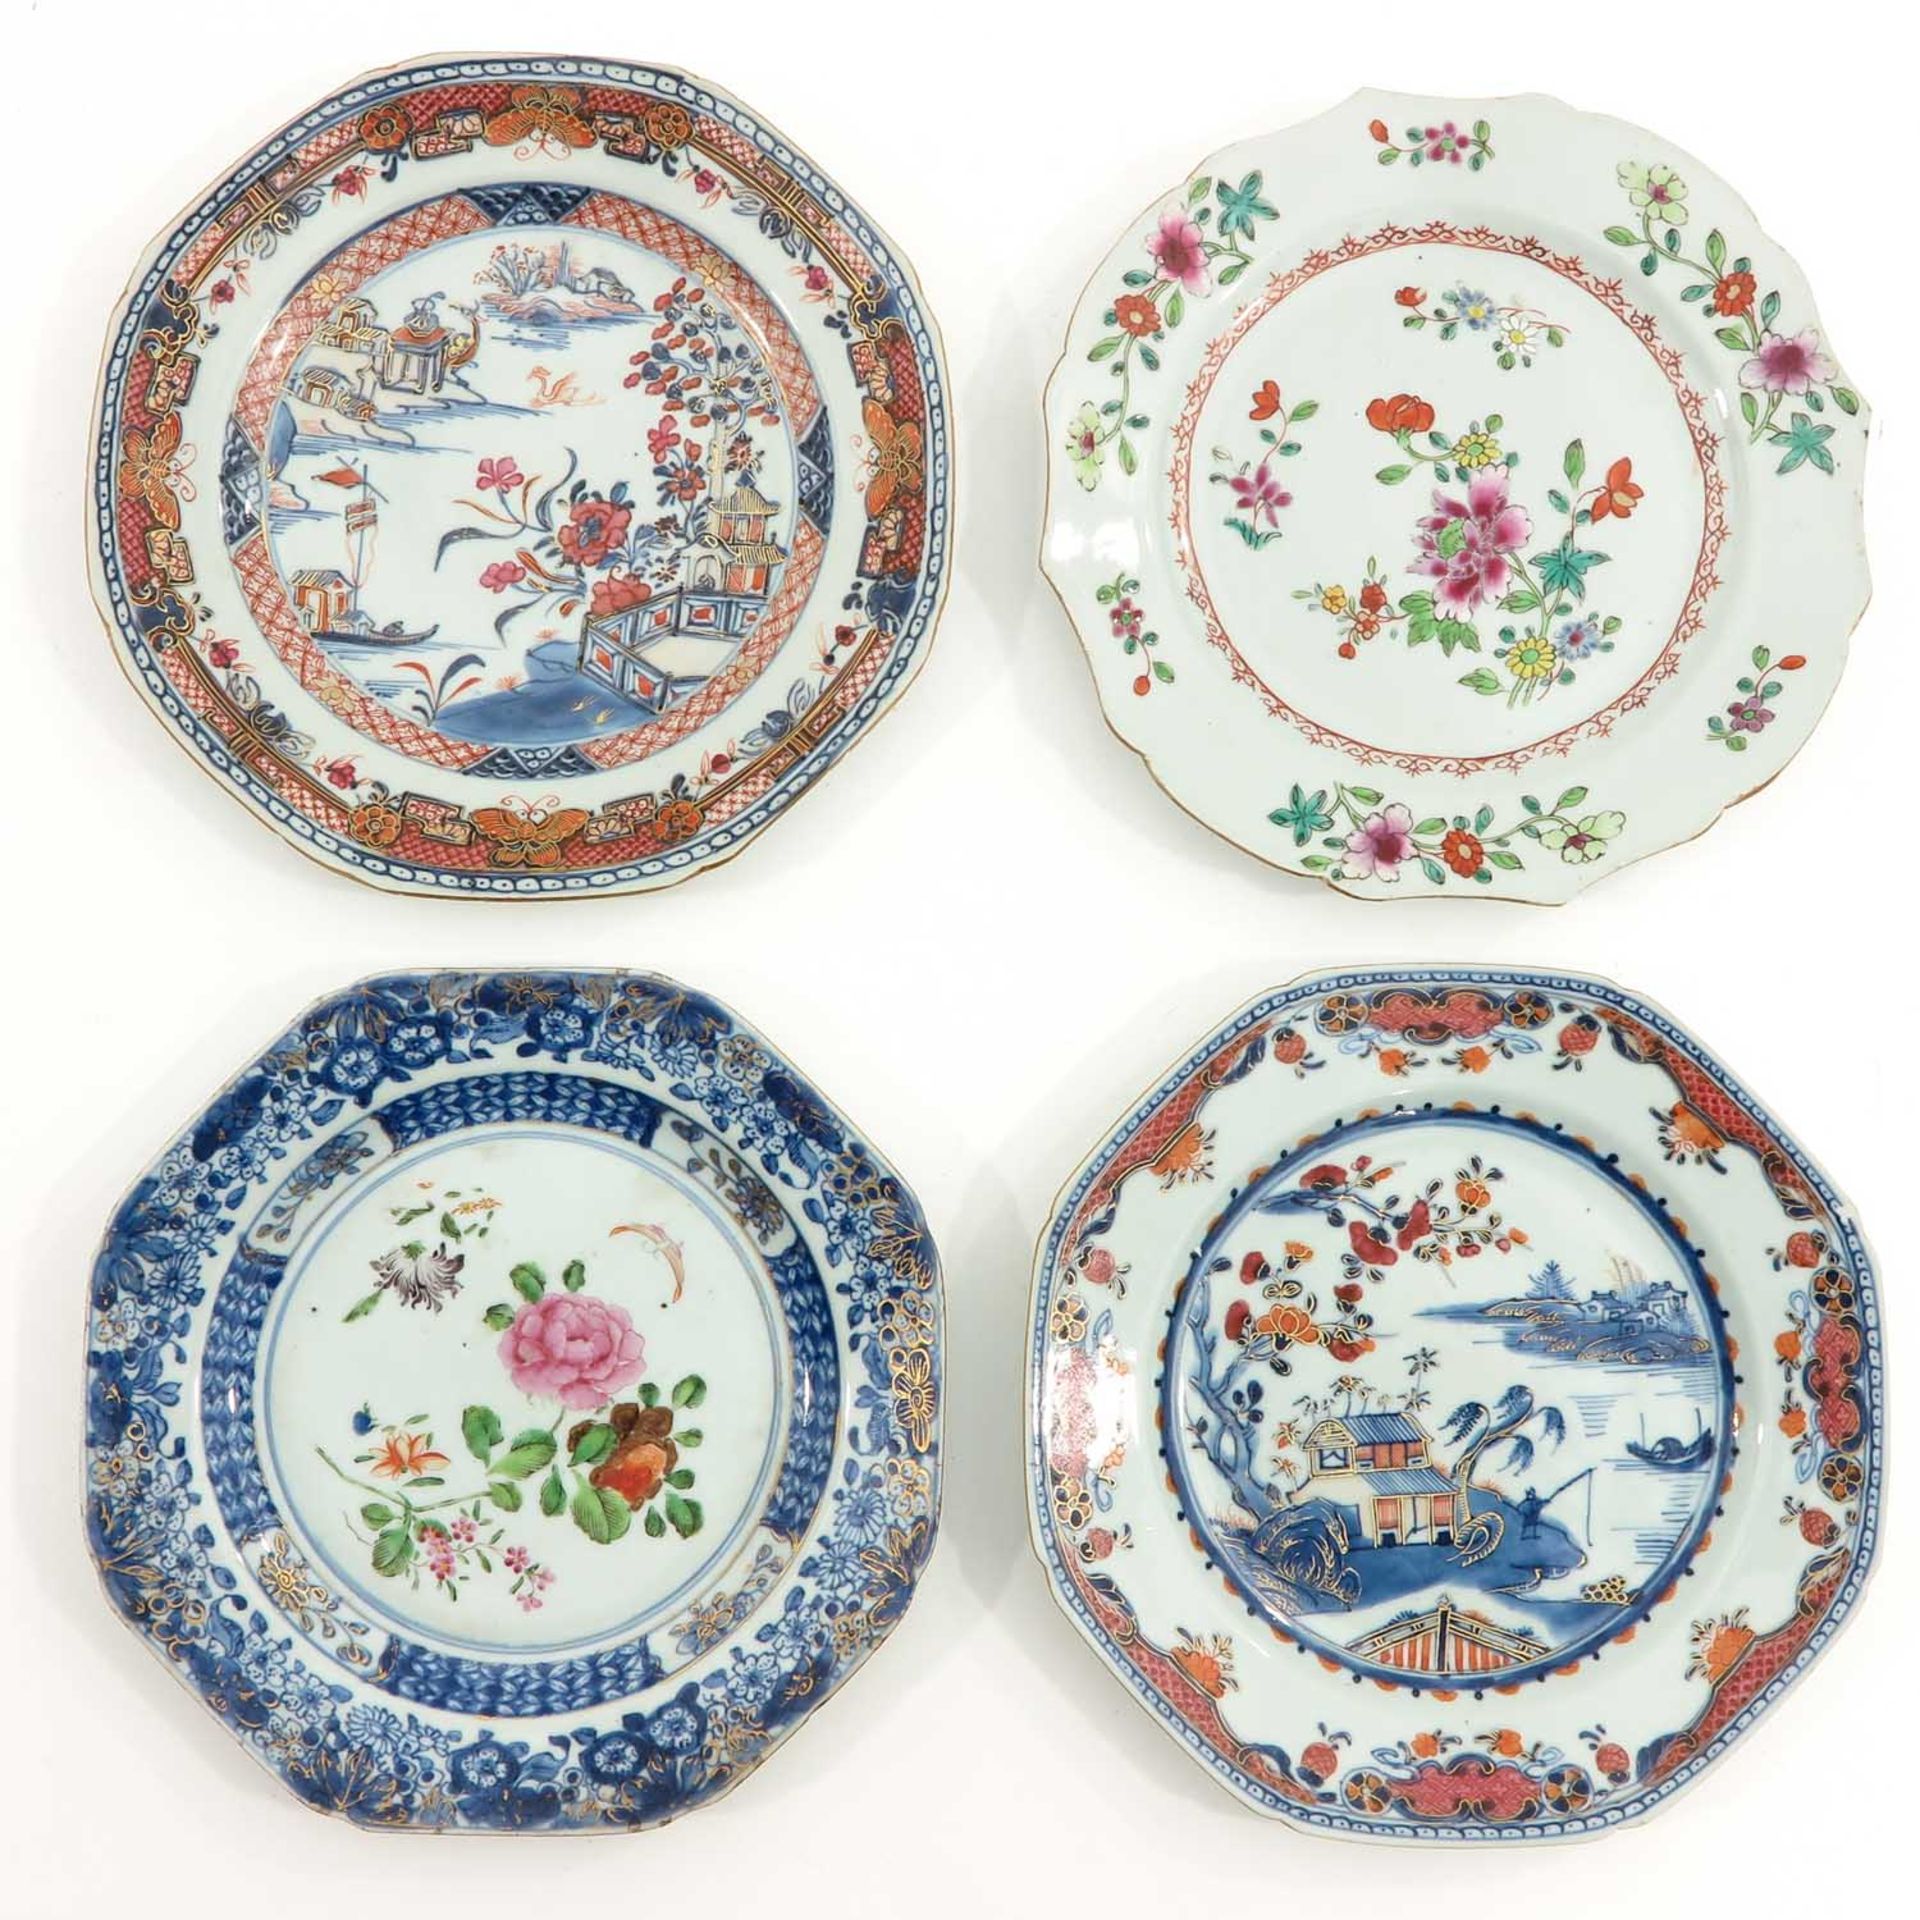 A Collection of 4 Plates